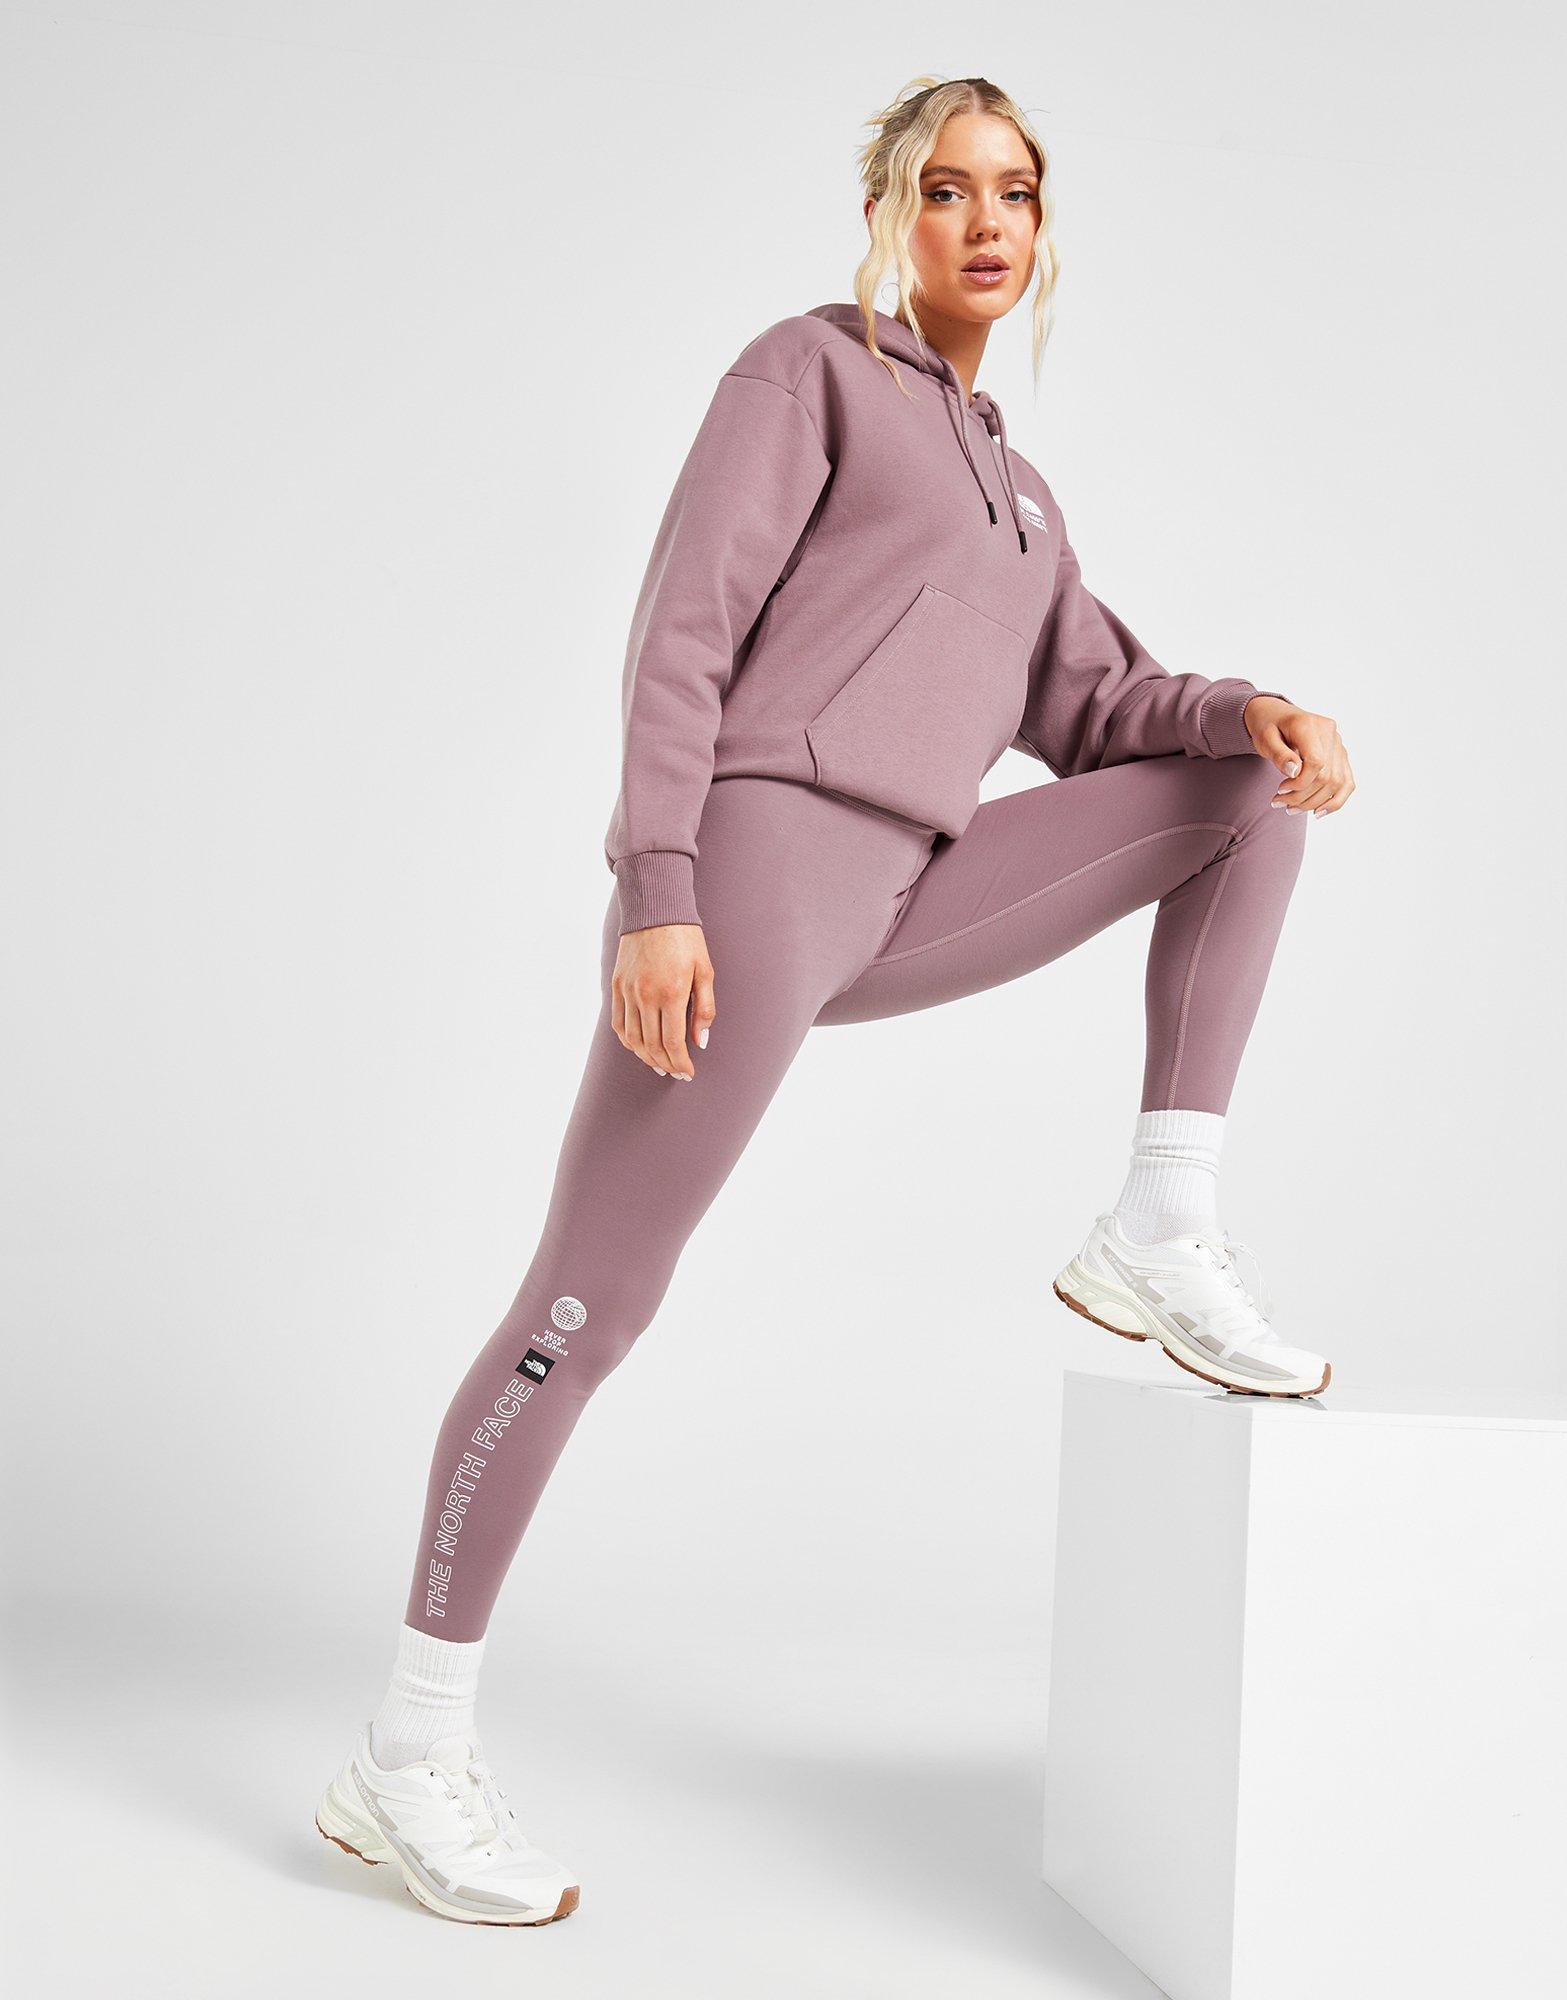 Grey The North Face Energy Coordinates Leggings - JD Sports Global